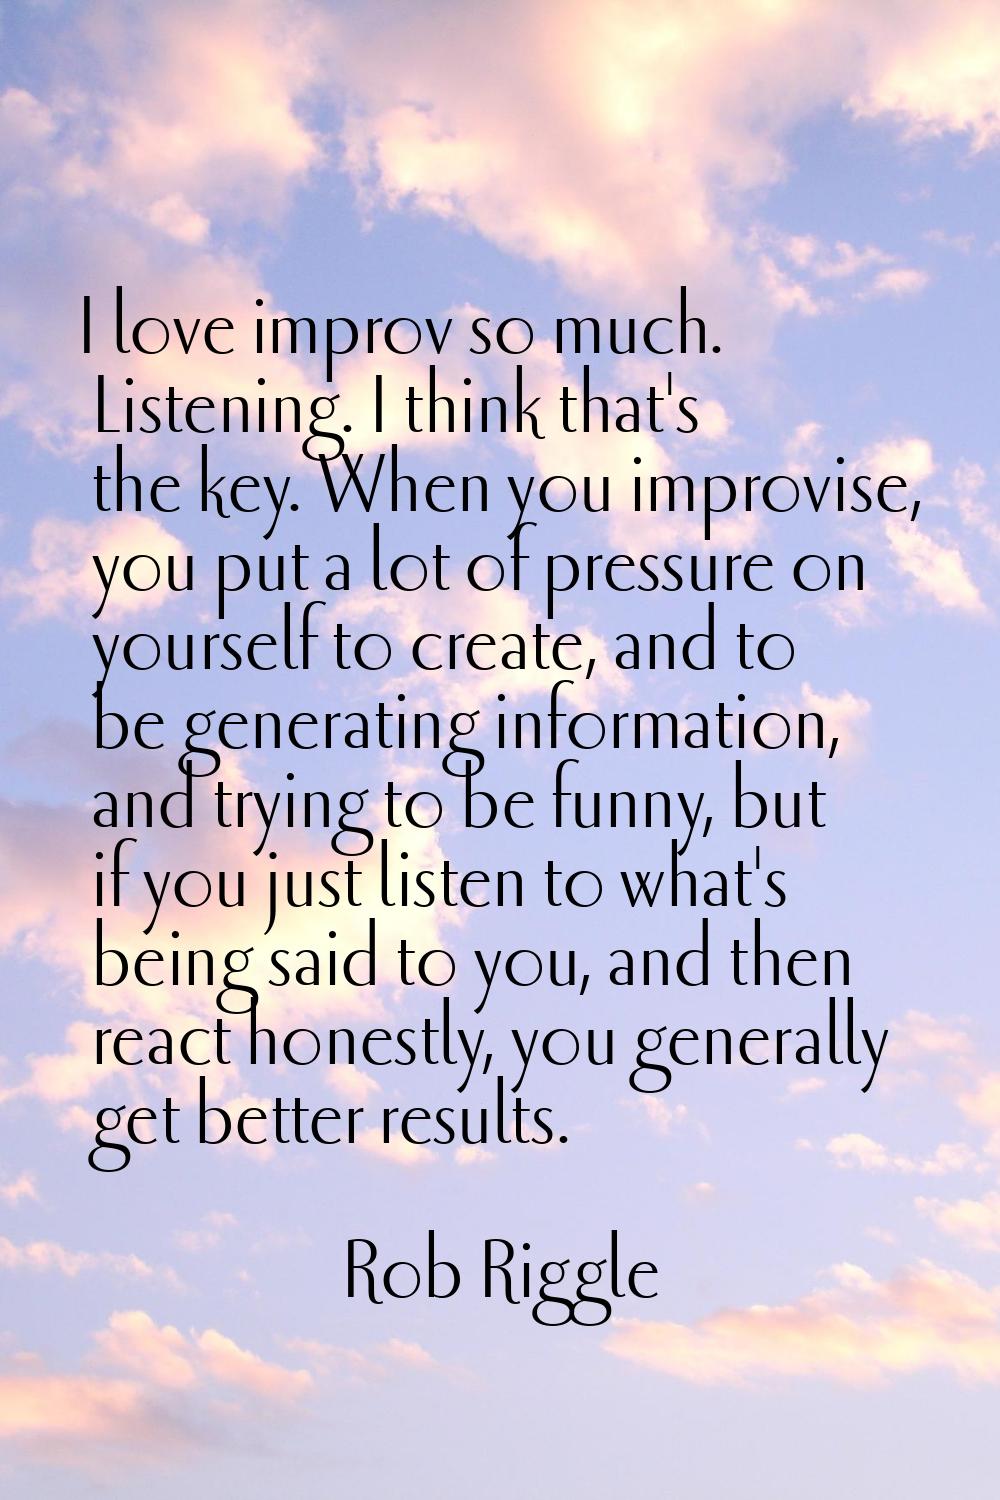 I love improv so much. Listening. I think that's the key. When you improvise, you put a lot of pres